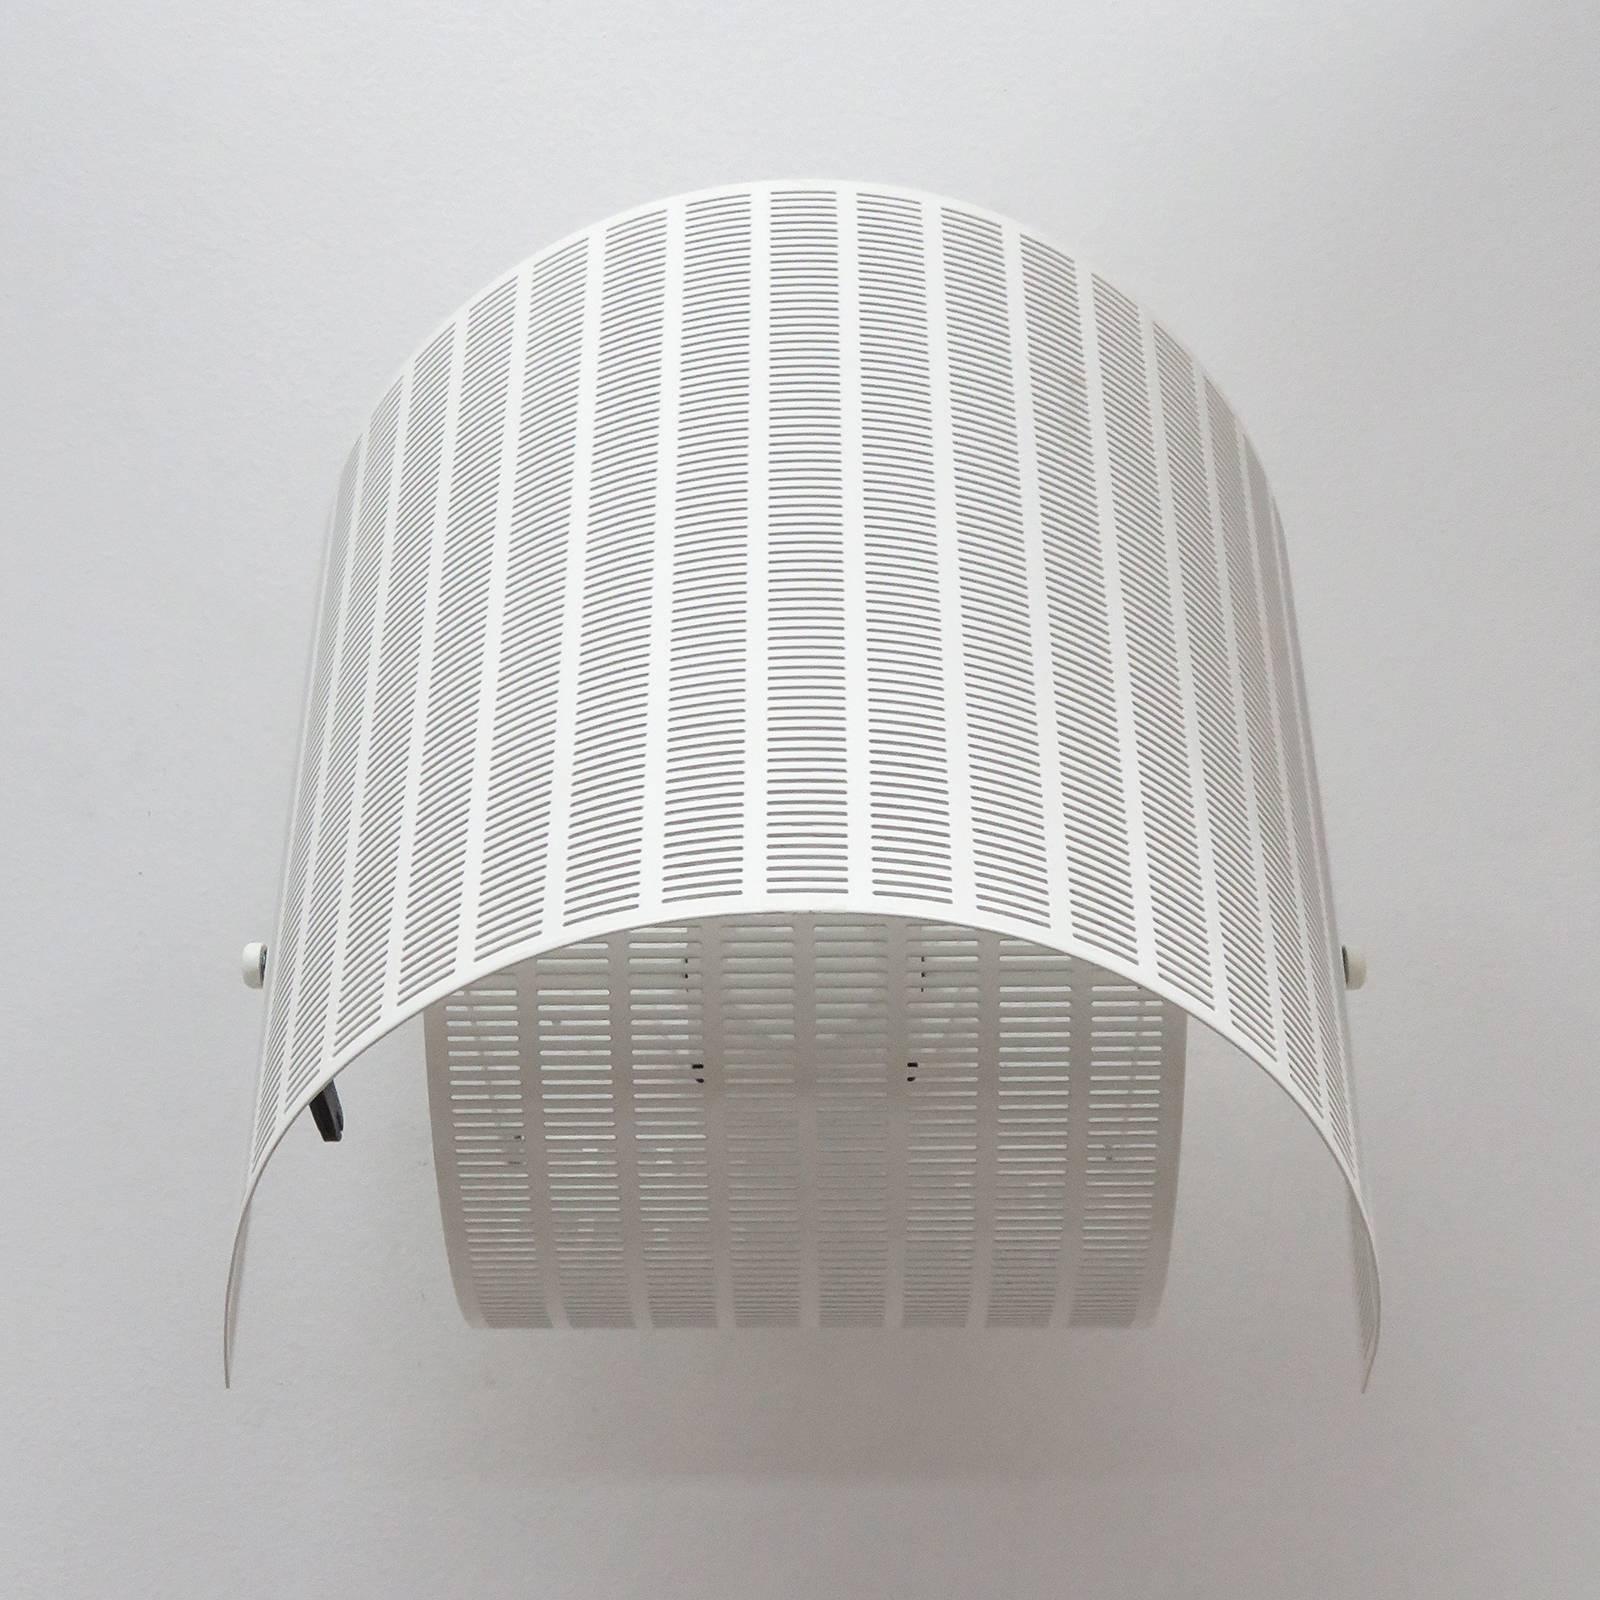 Sculptural wall lamp, model 'Shogun Parete', was designed by Mario Botta for Artemide in 1986 in Italy. Comprised of two perforated, adjustable shade elements reminiscent of Japanese head wear, marked.